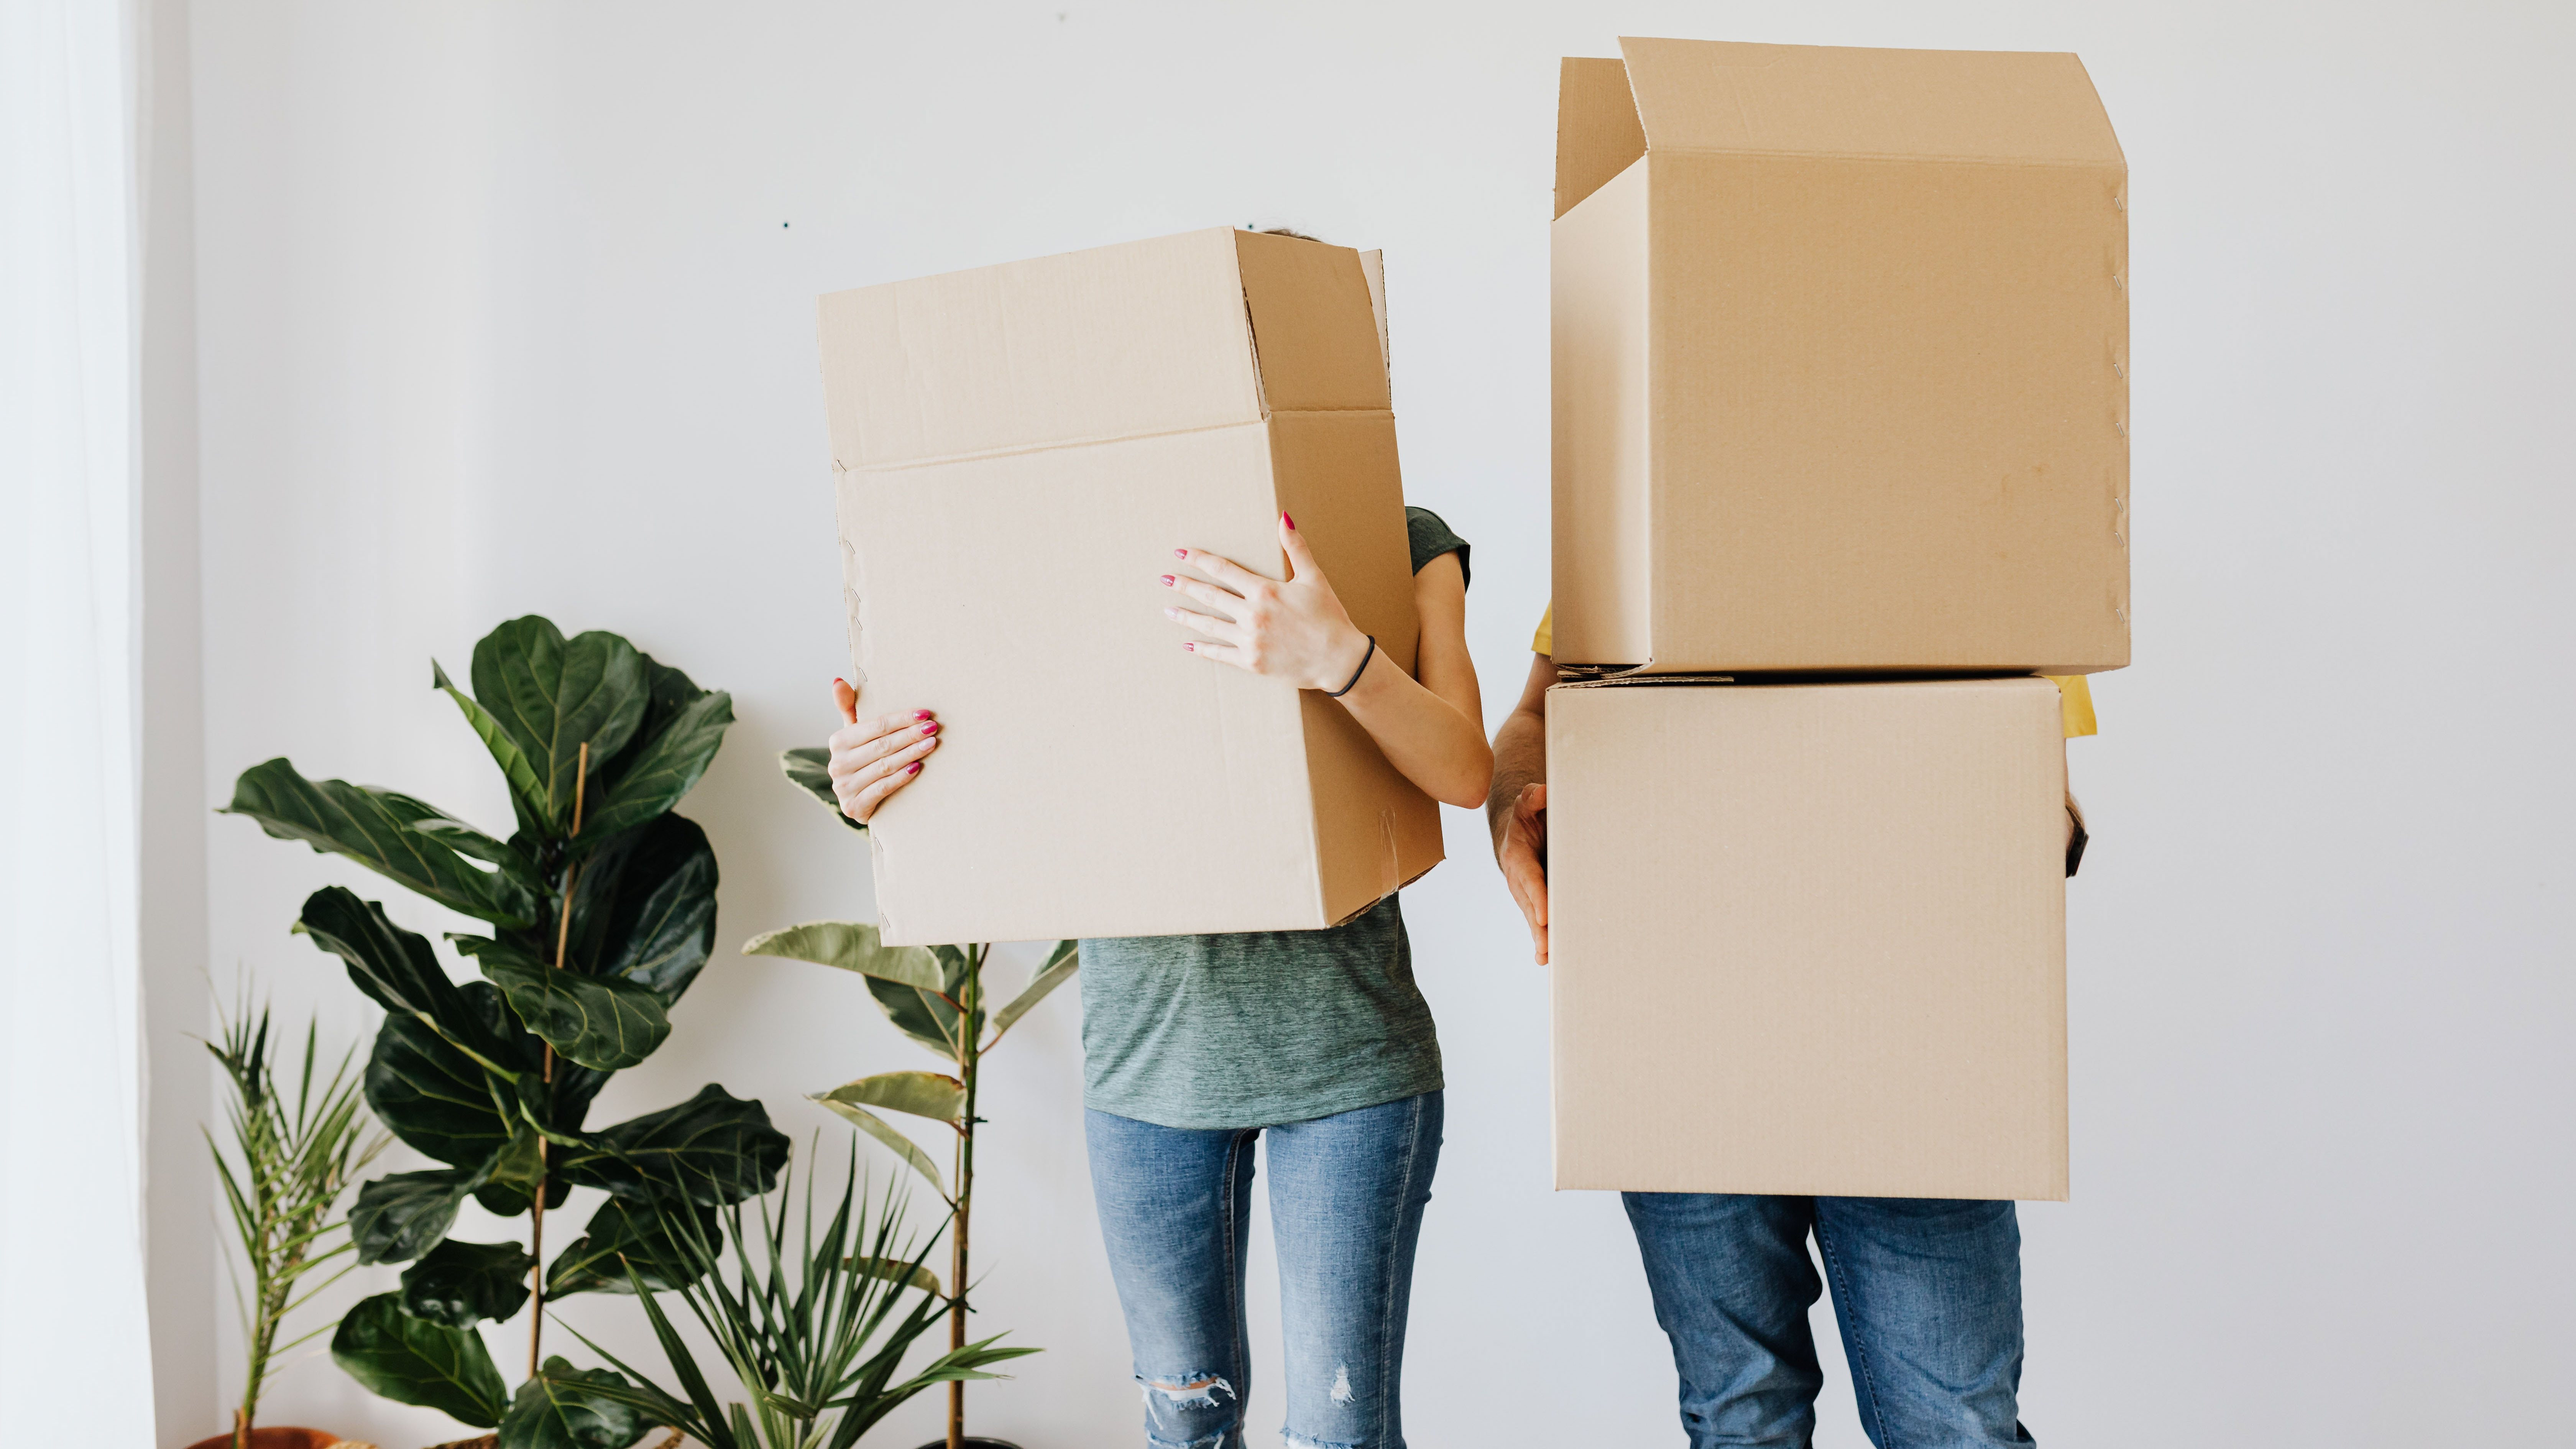 Two people holding cardboard boxes. Person on left holds one large box and person of right hold two boxes stacked, you cannot see their faces. Both people wear blue jeans. There is a leafy plant to the left.